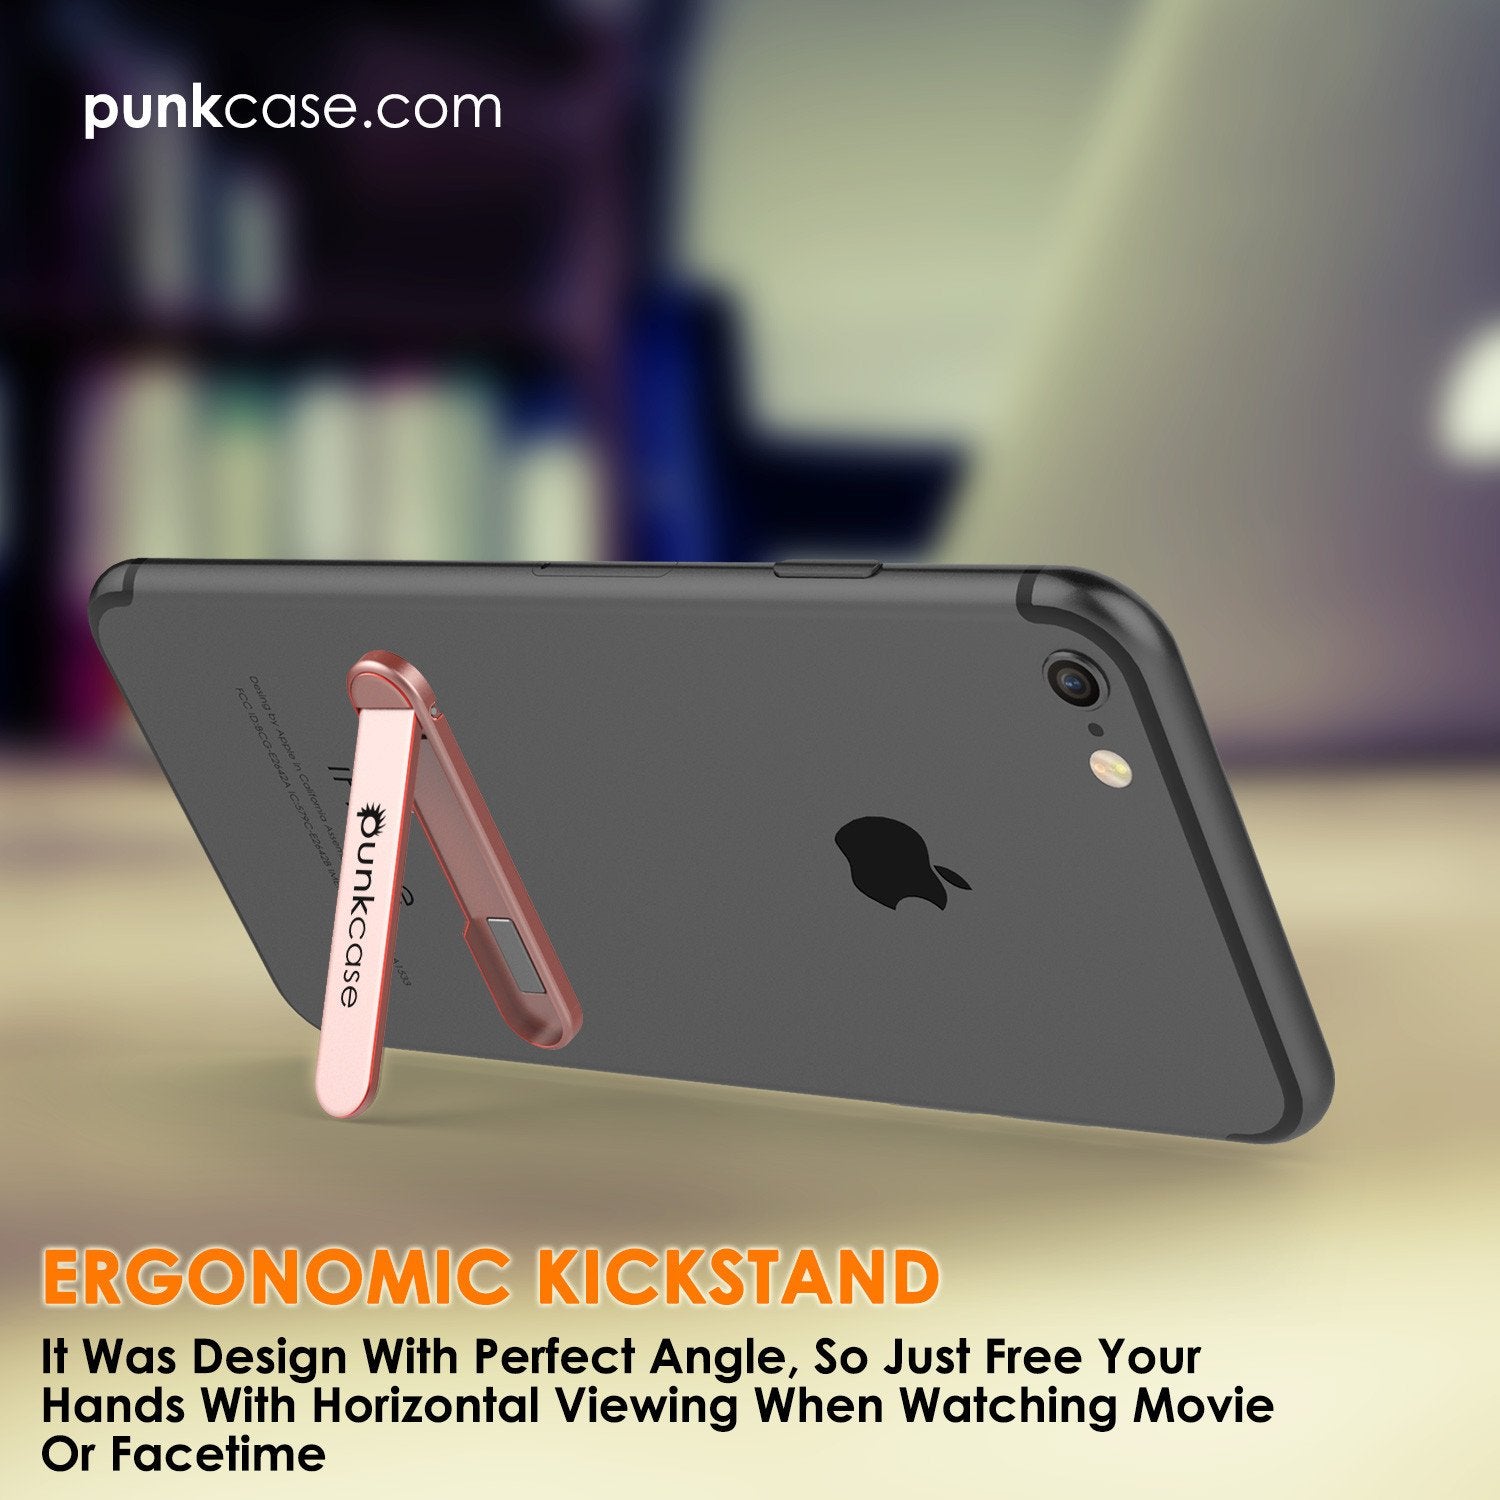 PUNKCASE FlickStick Universal Cell Phone Kickstand for all Mobile Phones & Cases with Flat Backs, One Finger Operation (Rose Gold) - PunkCase NZ